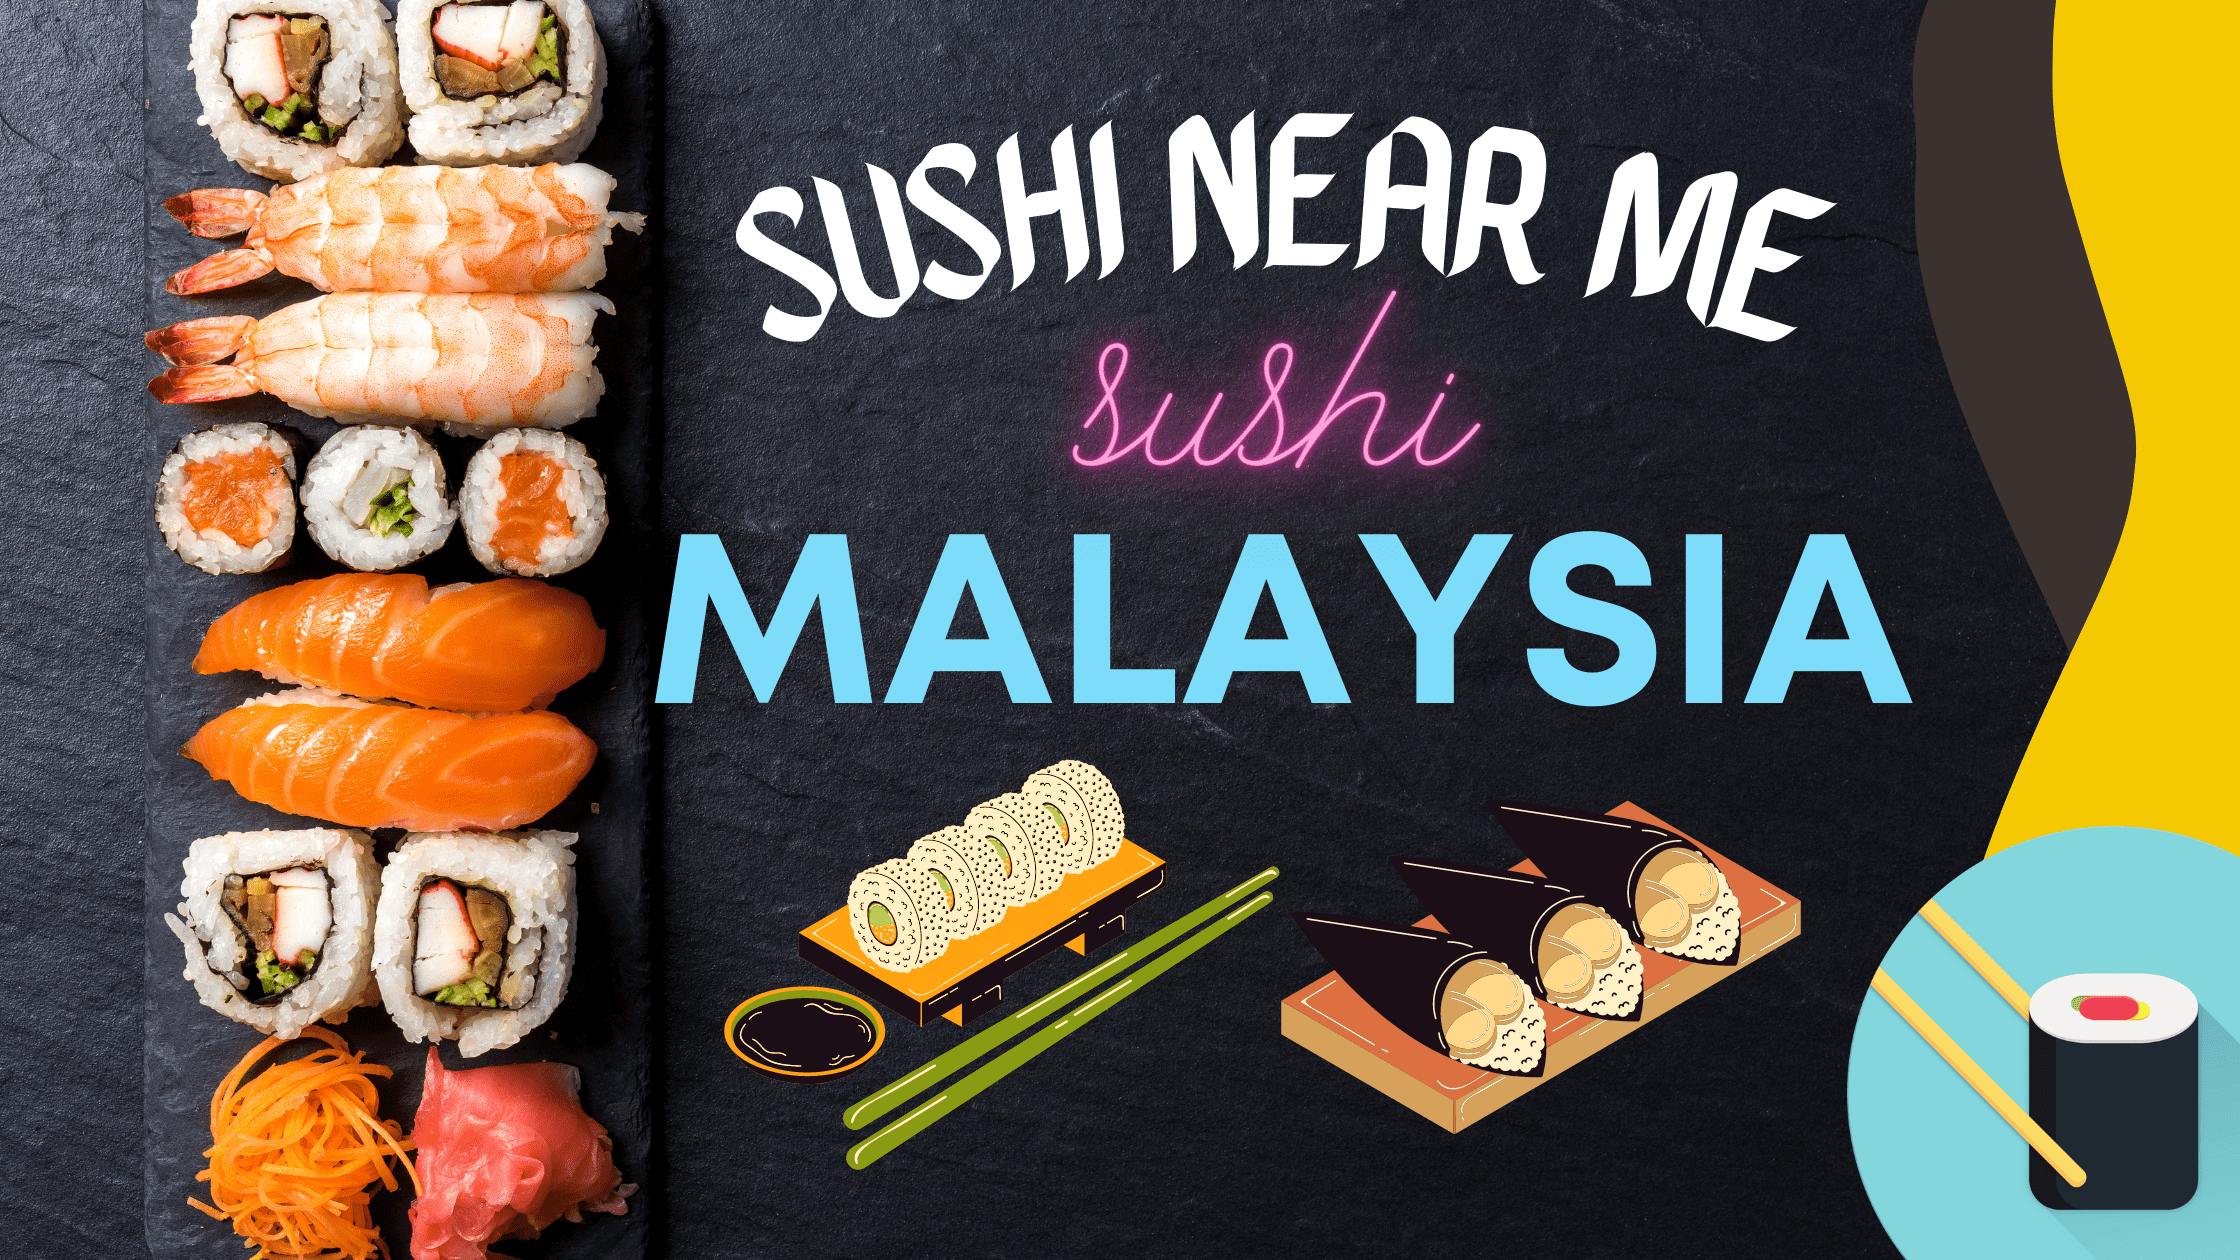 Top 6 best sushi in kl & best japanese restaurant in kl, Malaysia - Cheap & Budget Friendly japenese sushi restaurants can be easily find near by you